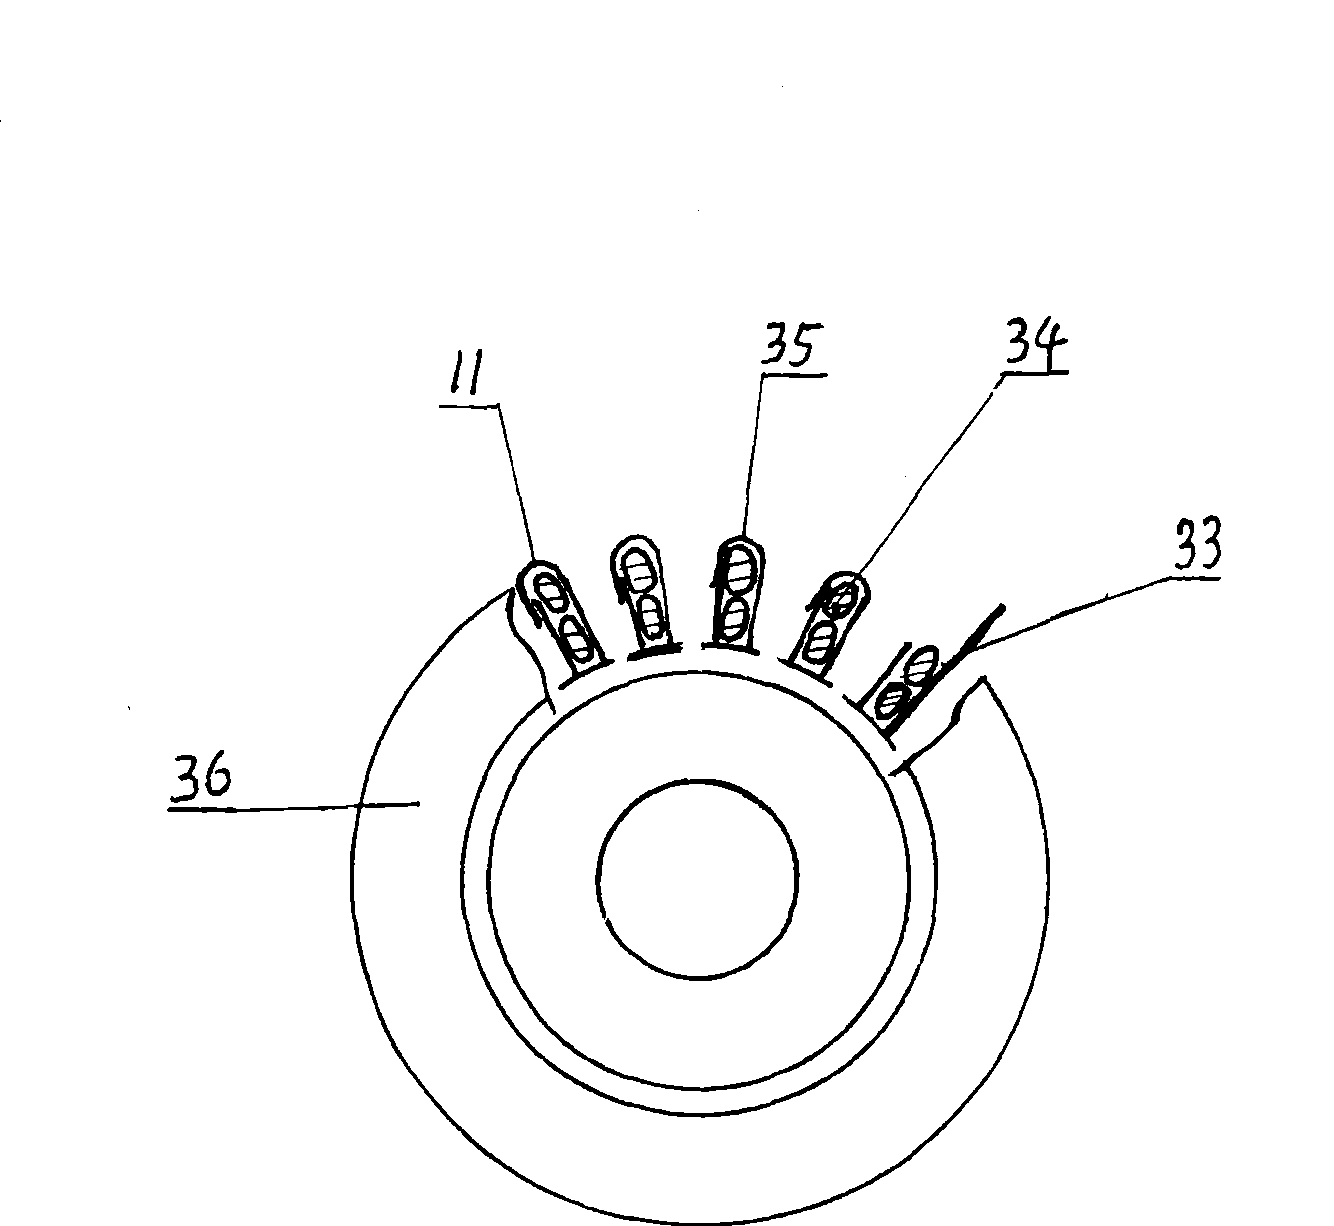 Composite electromagnetic material engine